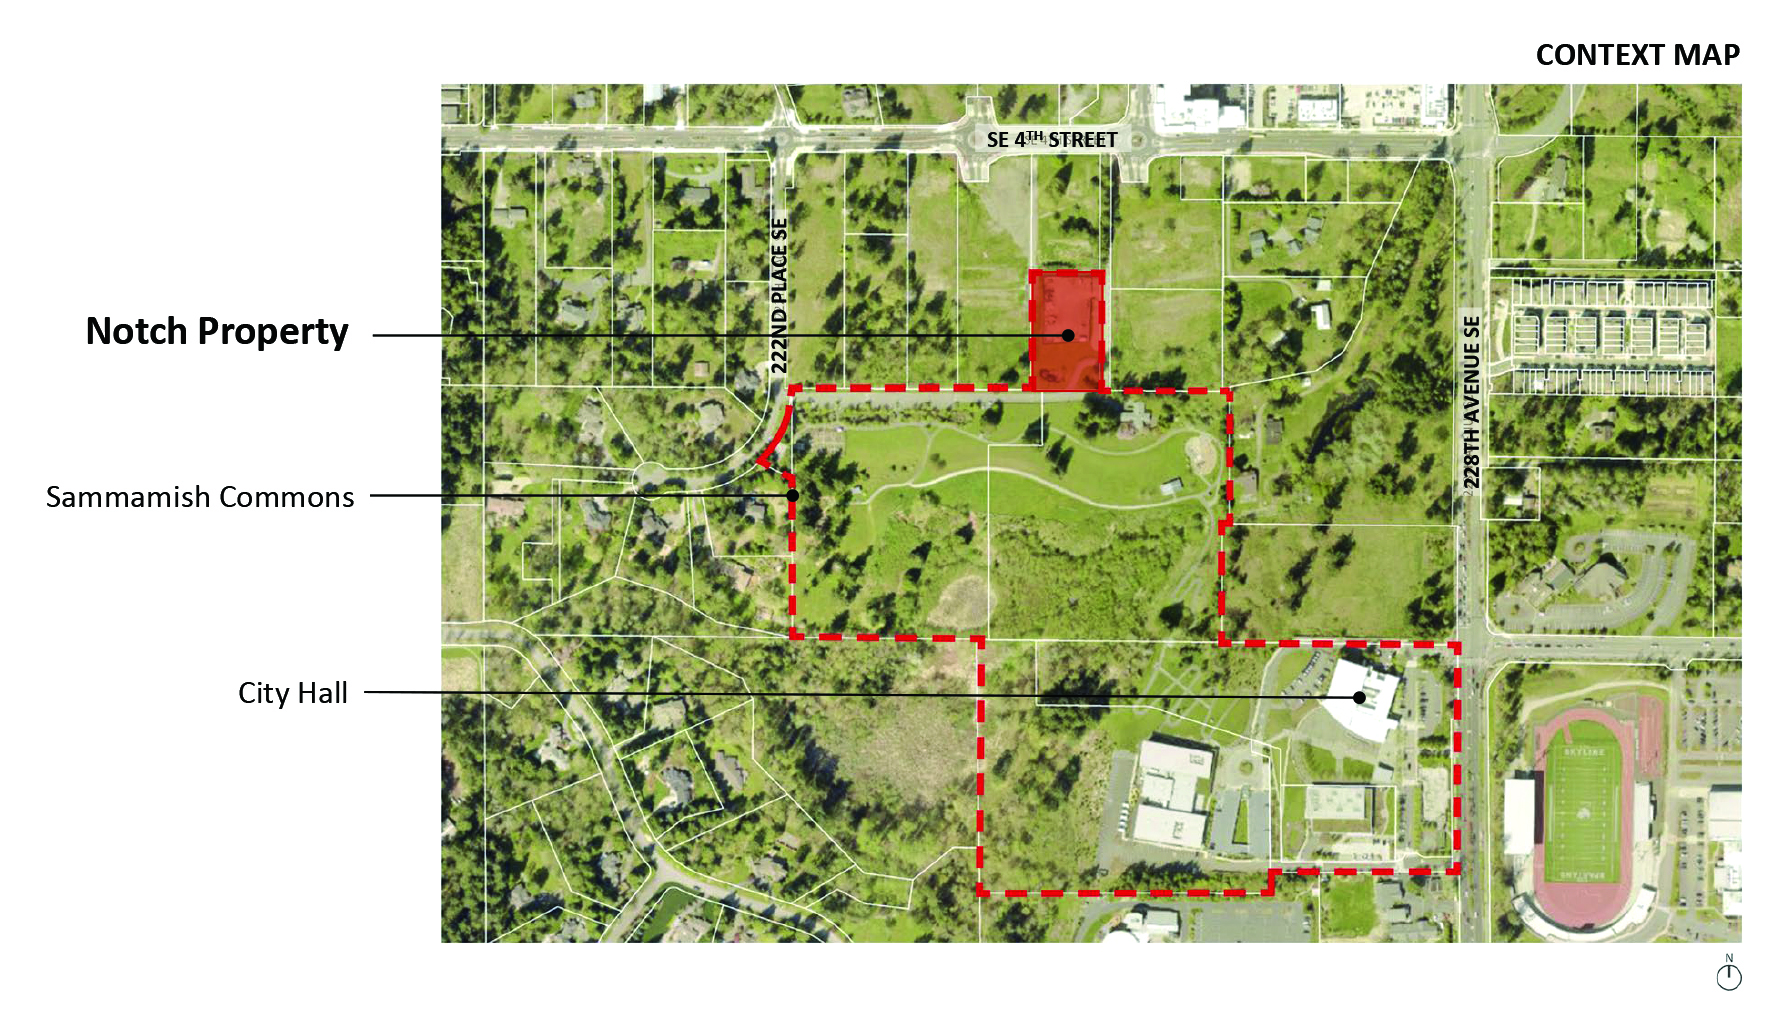 Context map showing the Notch Property is located next to Sammamish Commons.